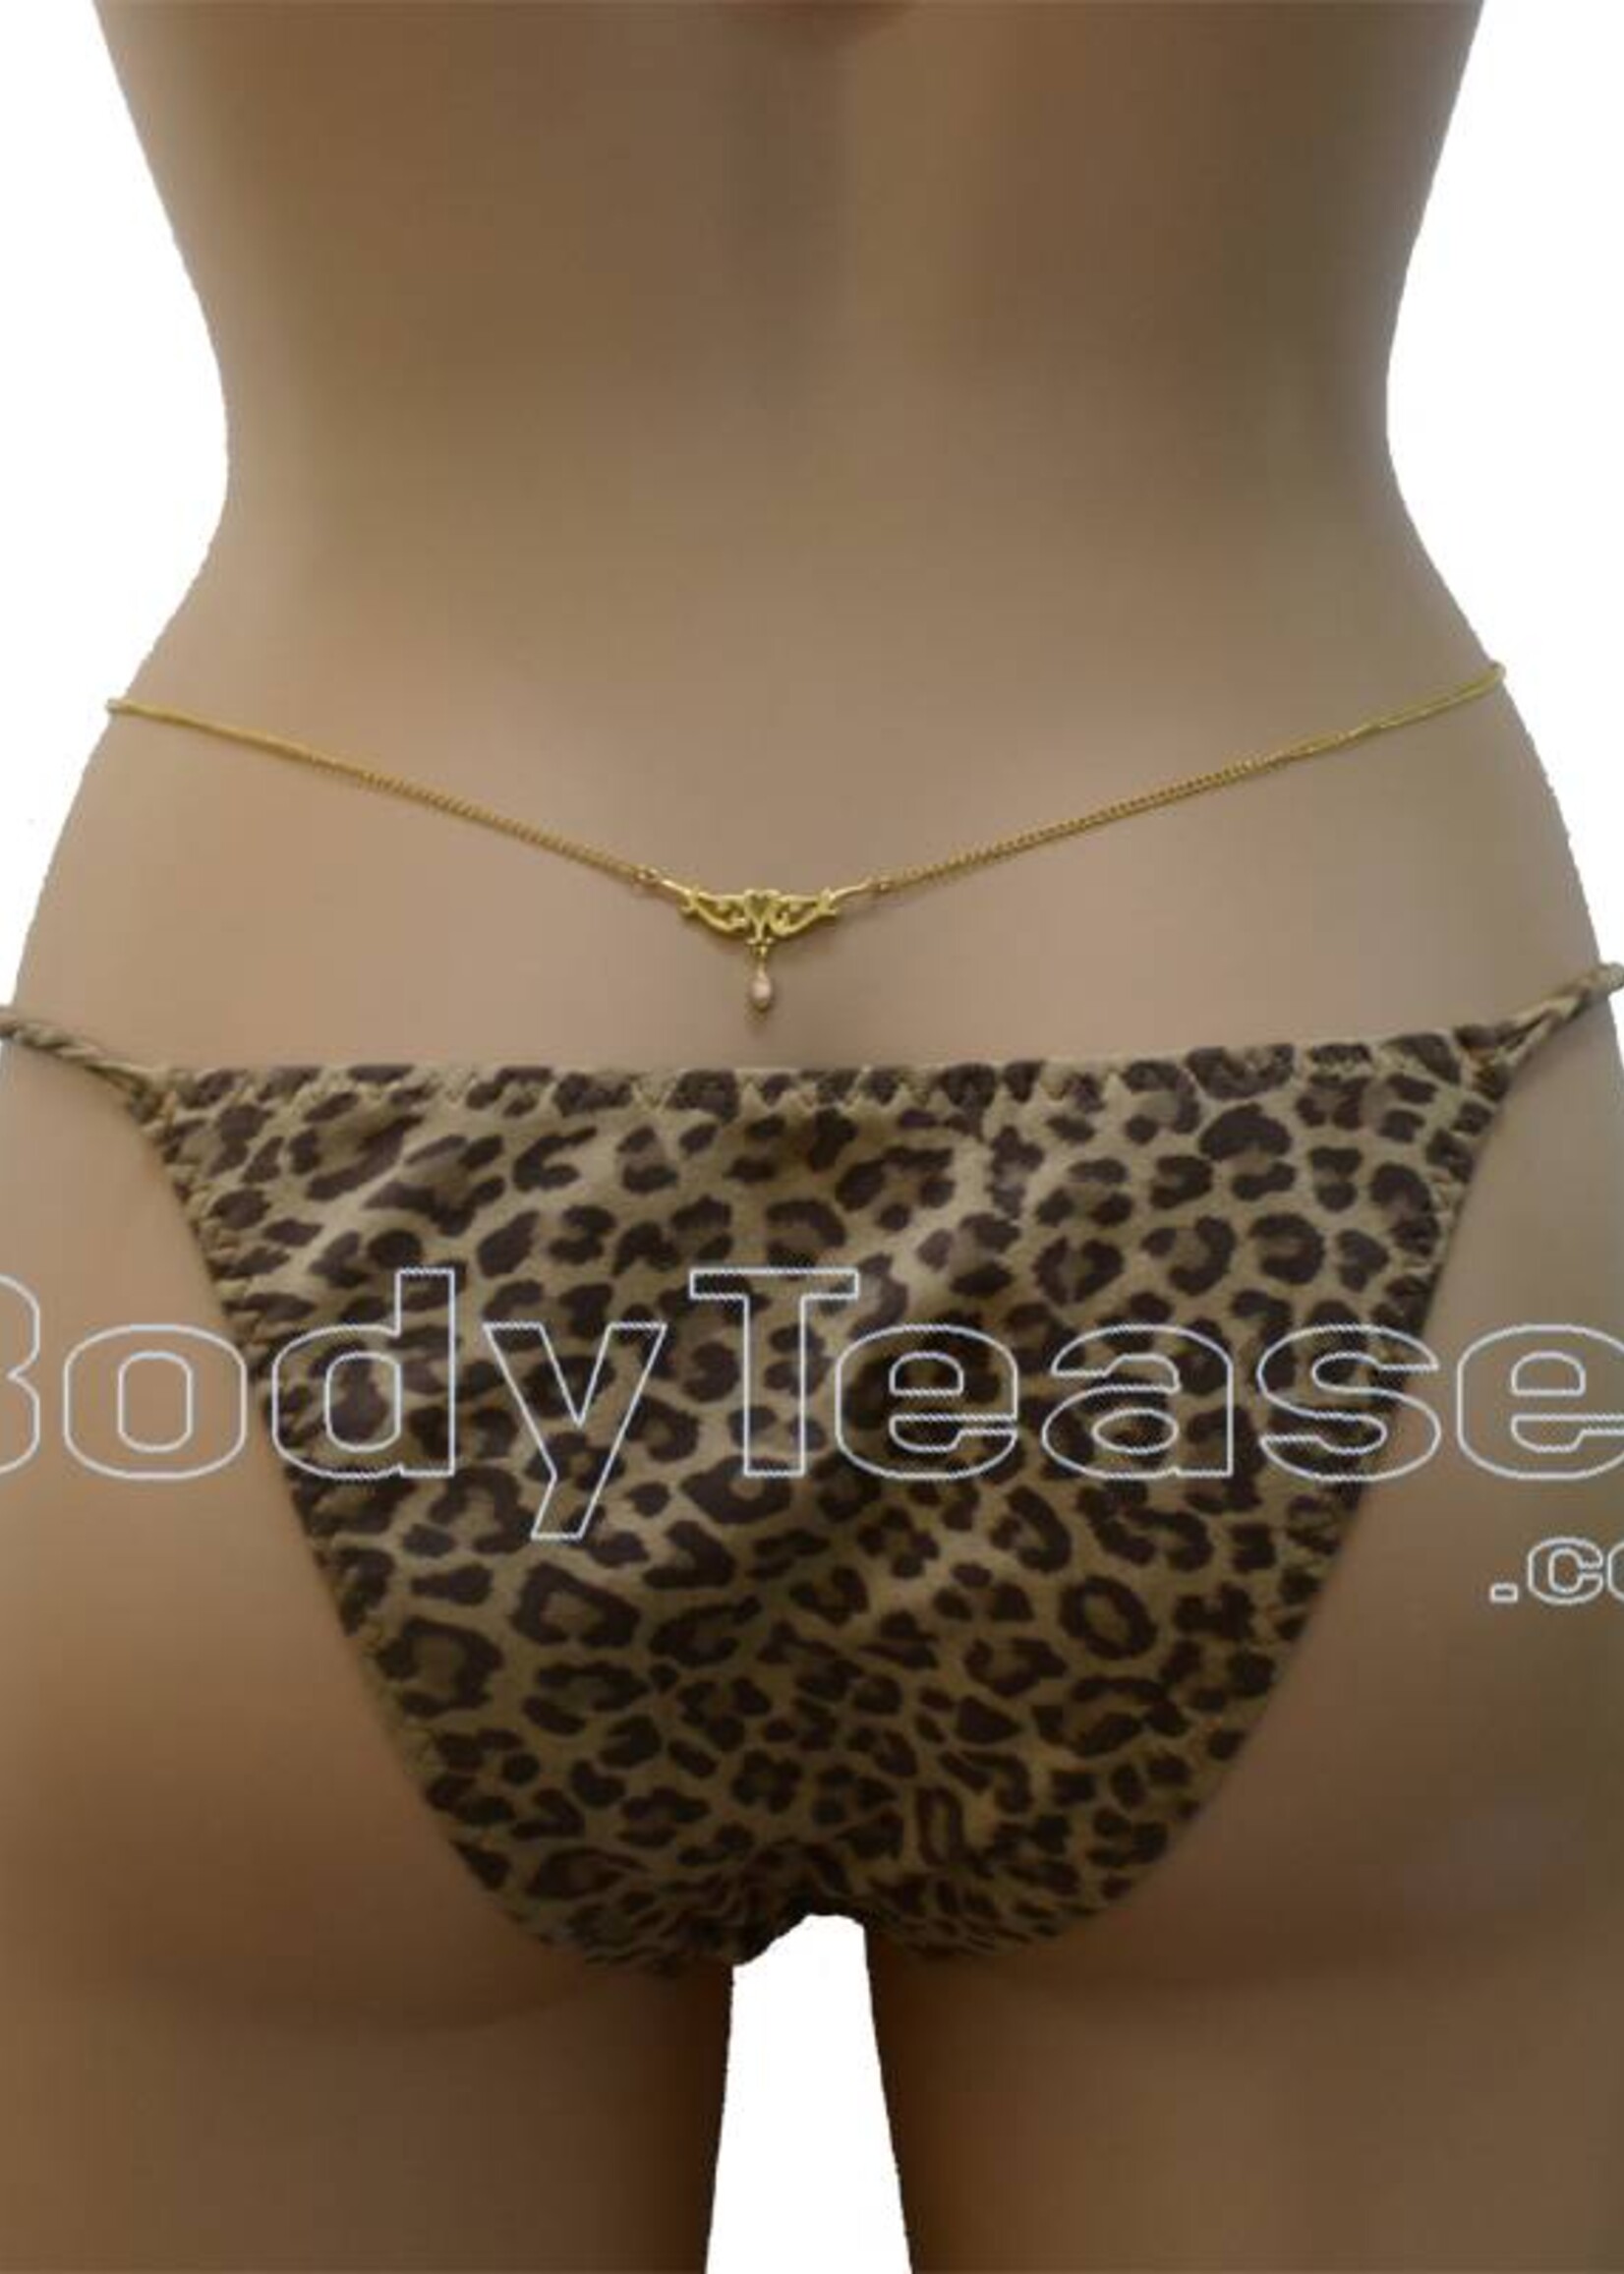 Back Belly Chain made of Gold plated Sterling Silver